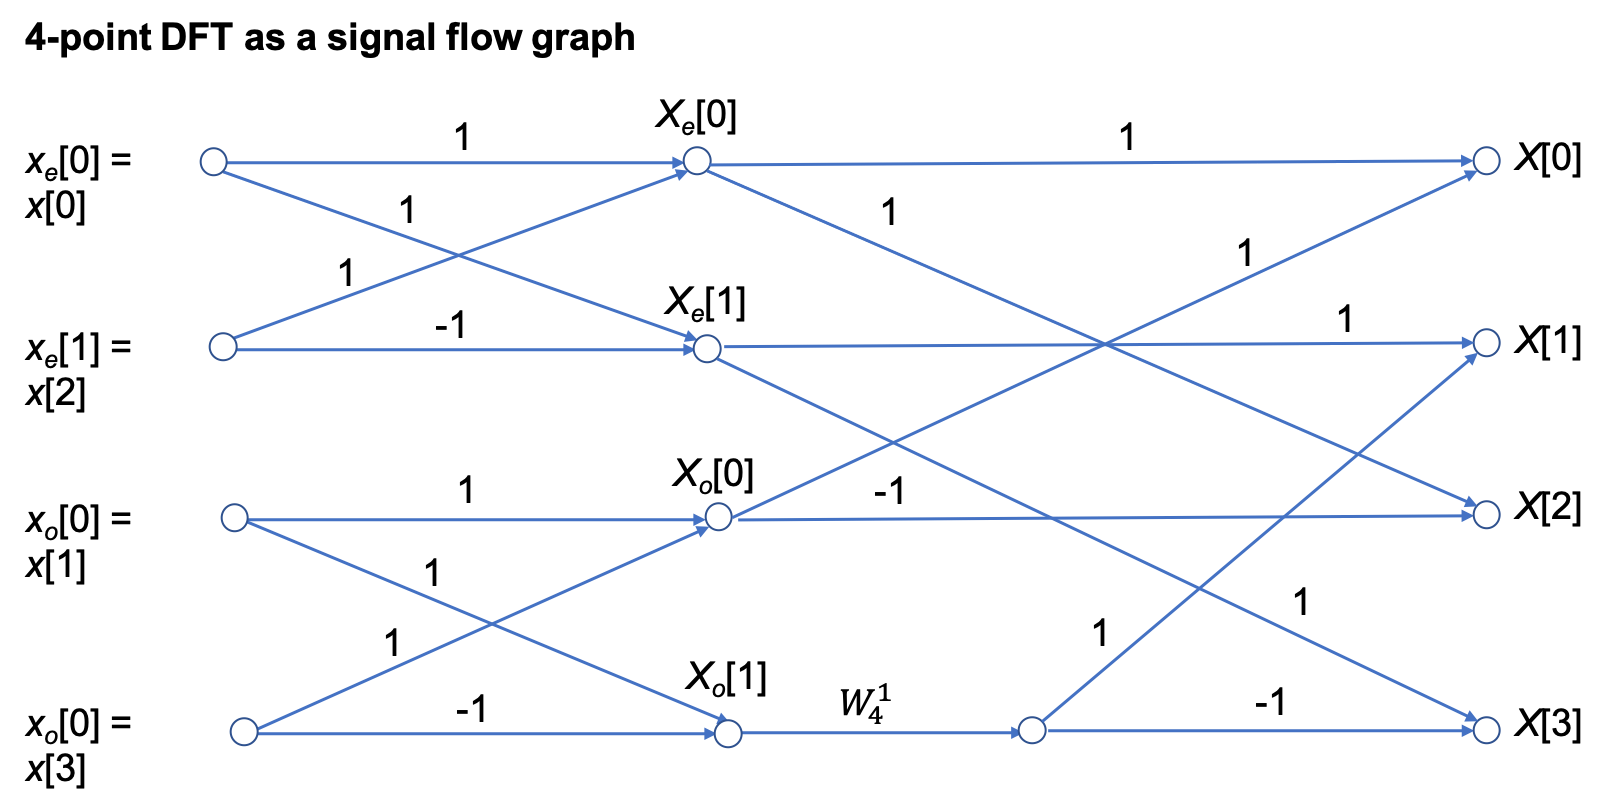 Signal flow graph of 4-point DFT